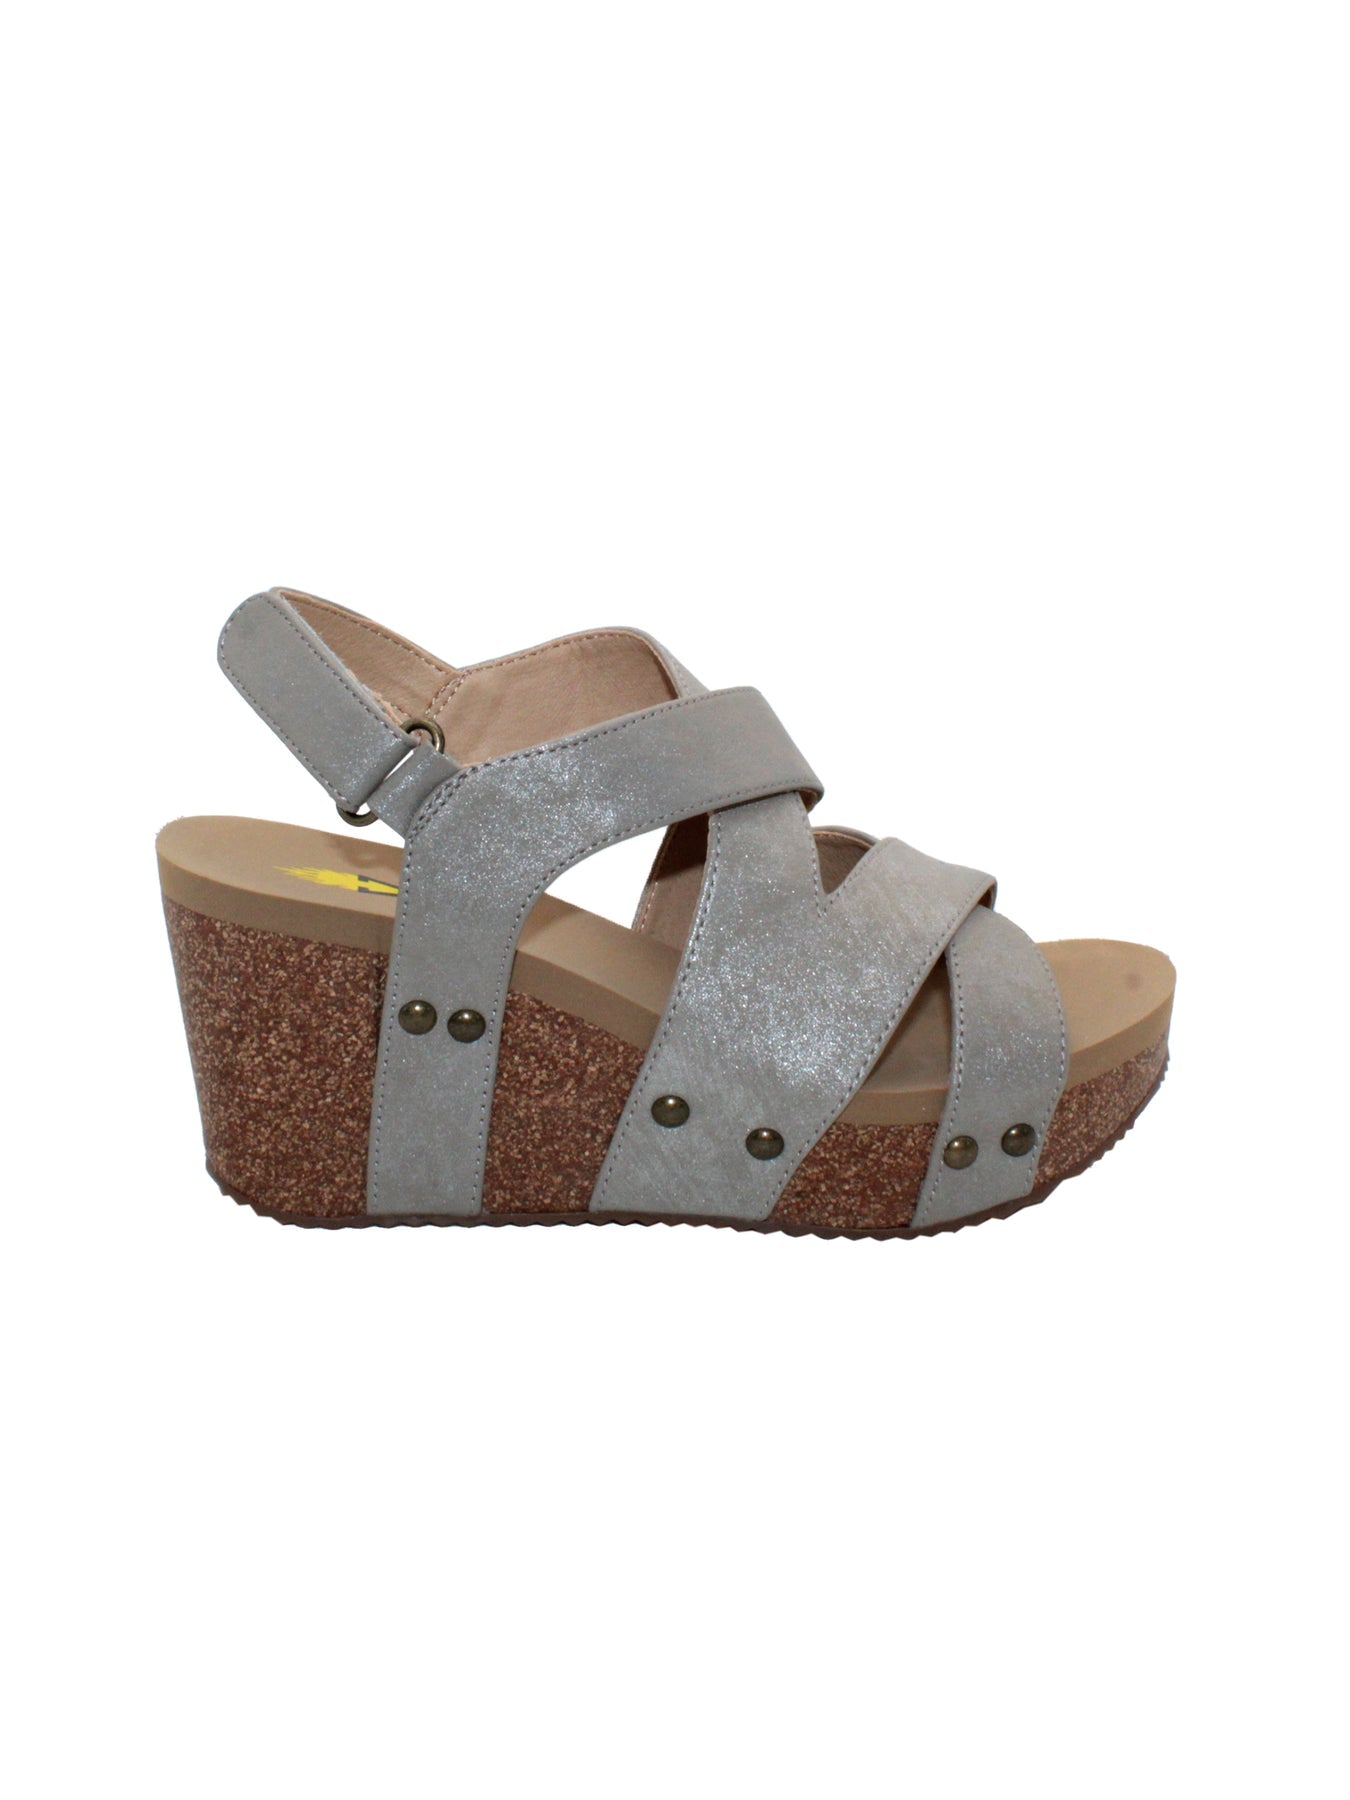 a modern feel with its asymmetrical upper in vegan leather and attractive metal adjustable buckle and clog stud accents. Featuring our signature ultra comfort EVA insole resting atop a moderate 2” cork wedge with rubber traction outsole for stability. Perfect with maxi dresses and boyfriend jeans alike.